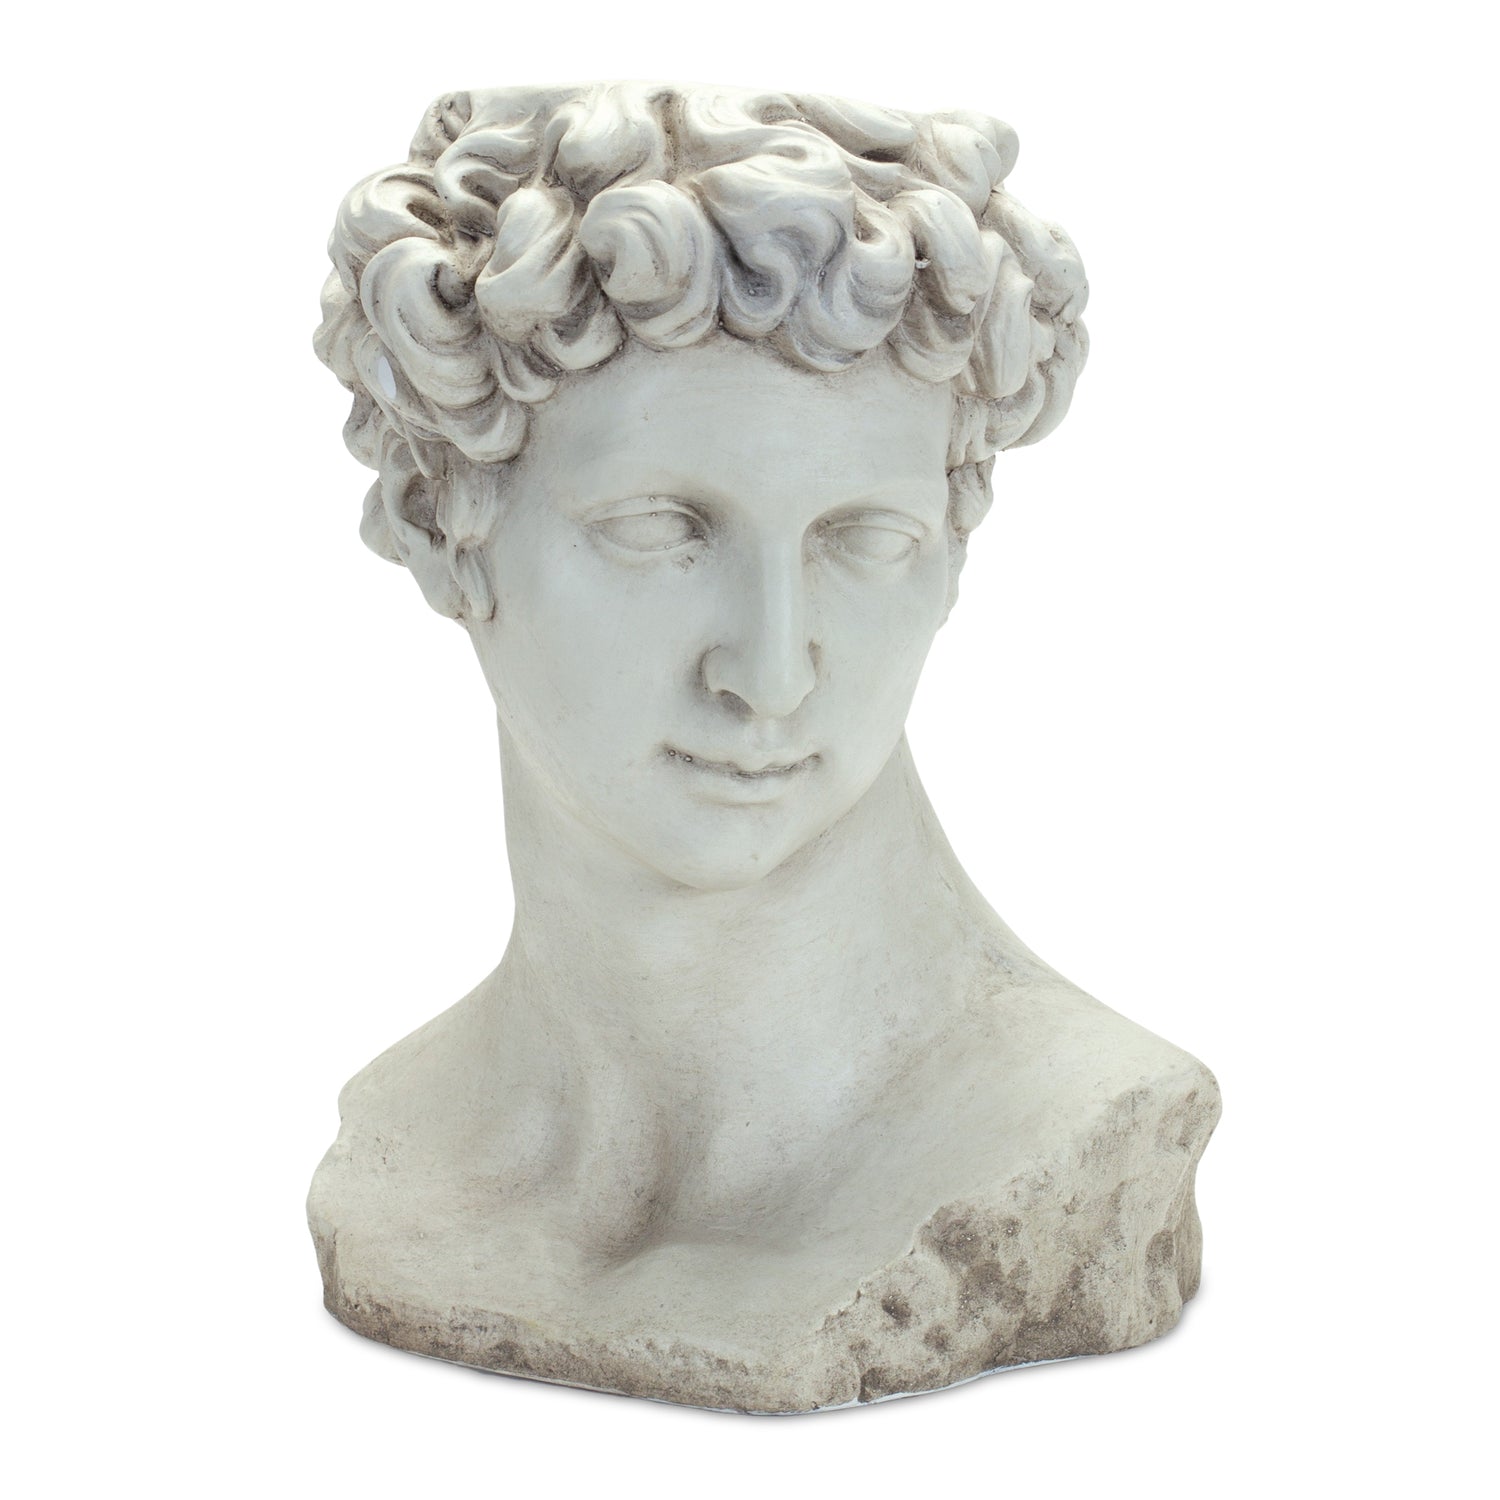 Roman Bust Container 12"L x 16.5"H Resin